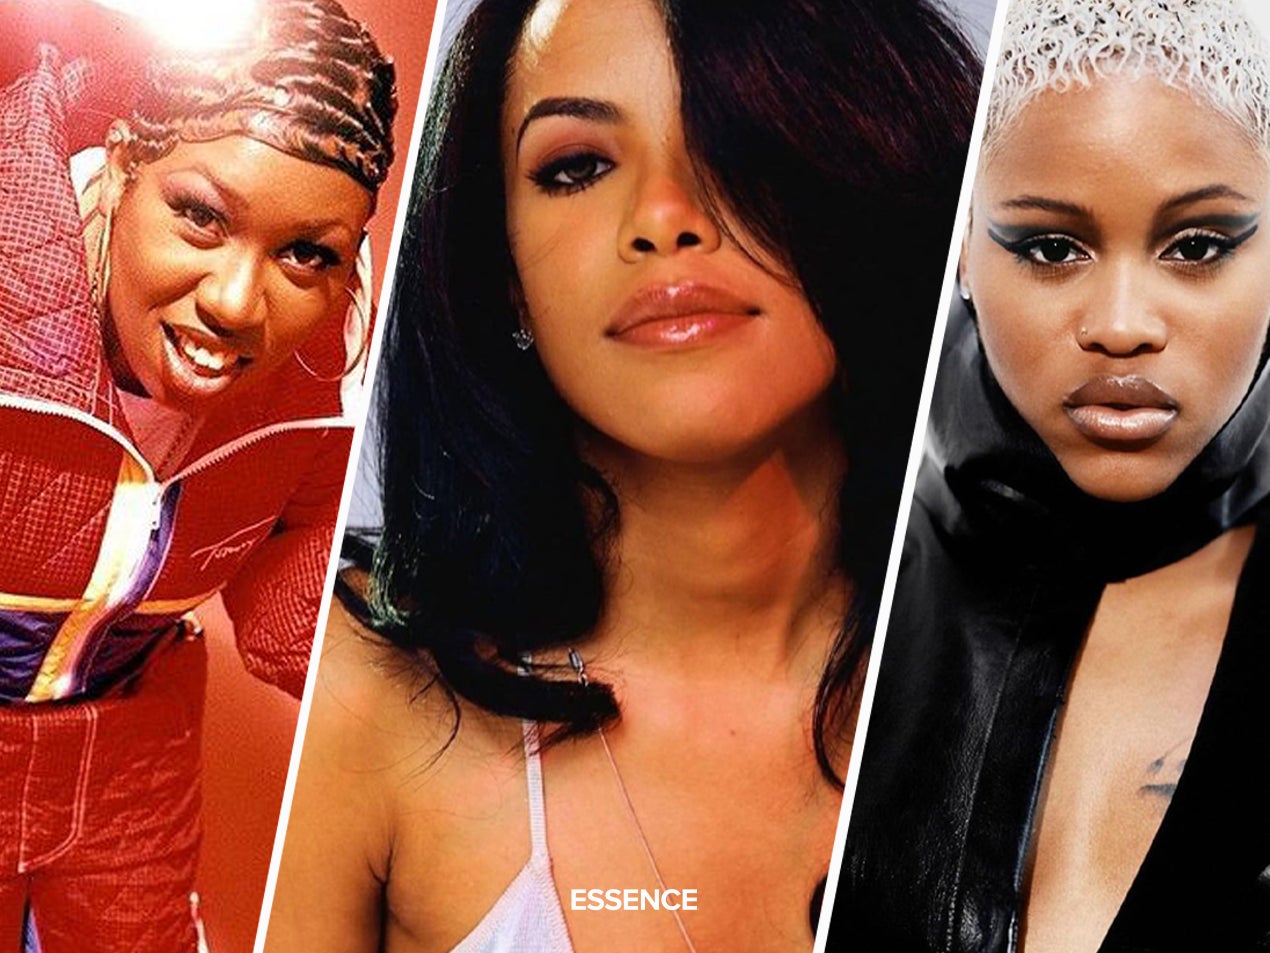 Eric Johnson Breaks Down His Images Of Missy Elliott, Aaliyah, Eve, And More